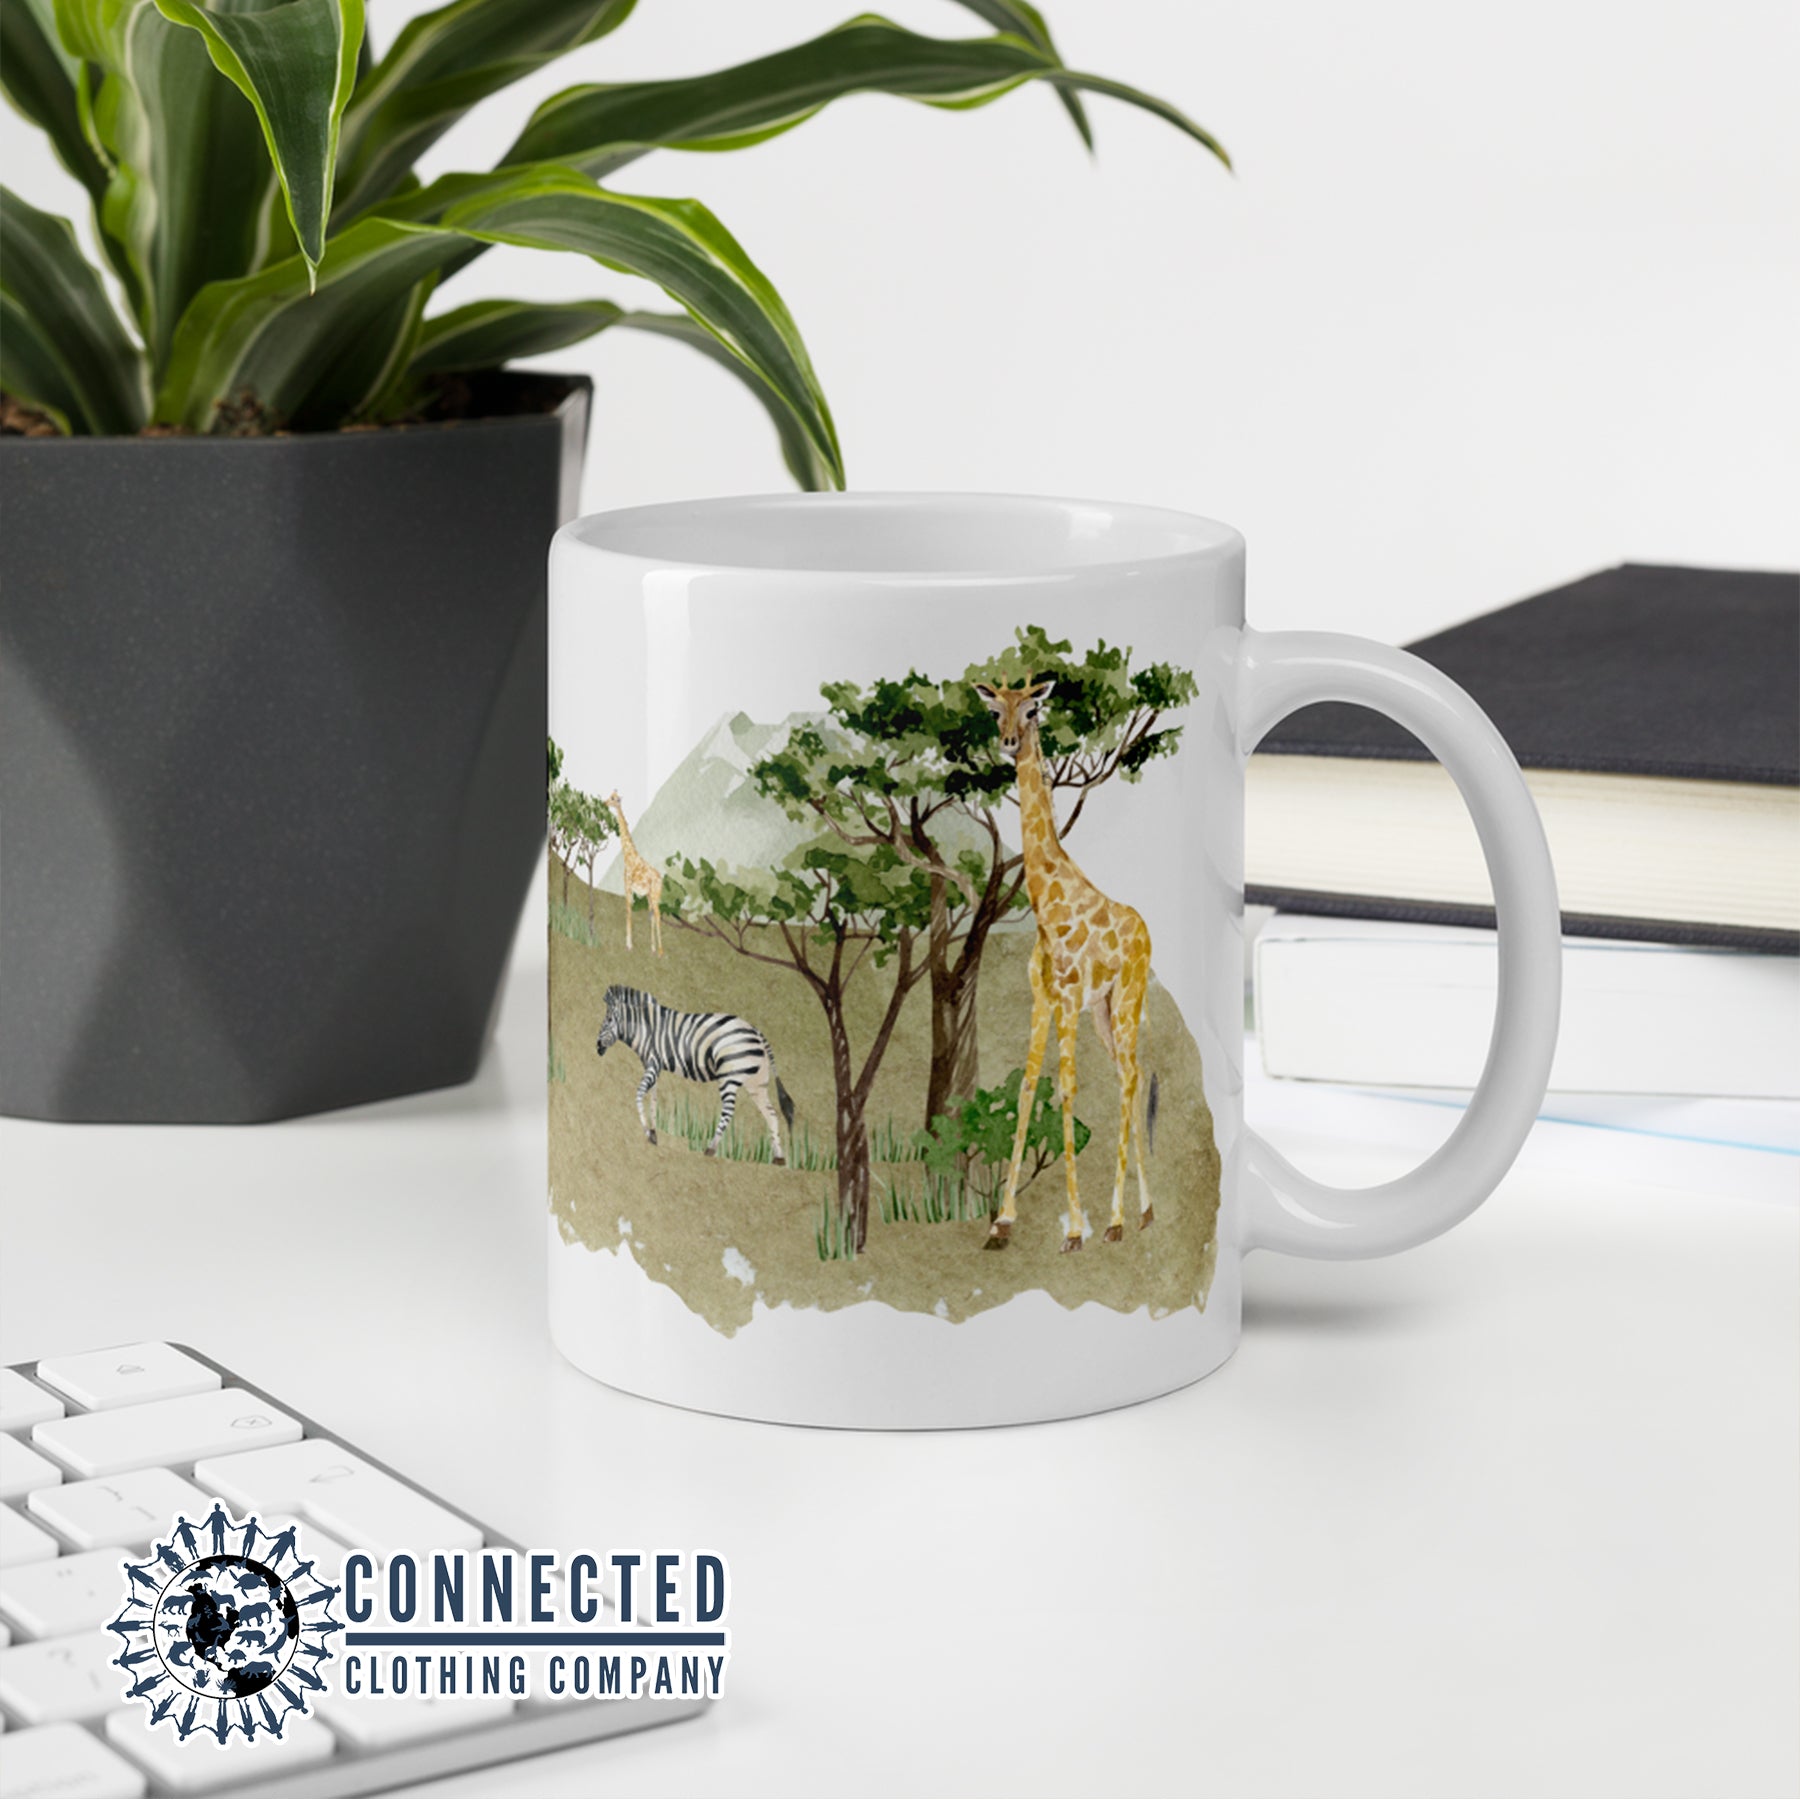 Keep Africa Wild Classic Mug - Connected Clothing Company - 10% of profits donated to the Giraffe Conservation Foundation